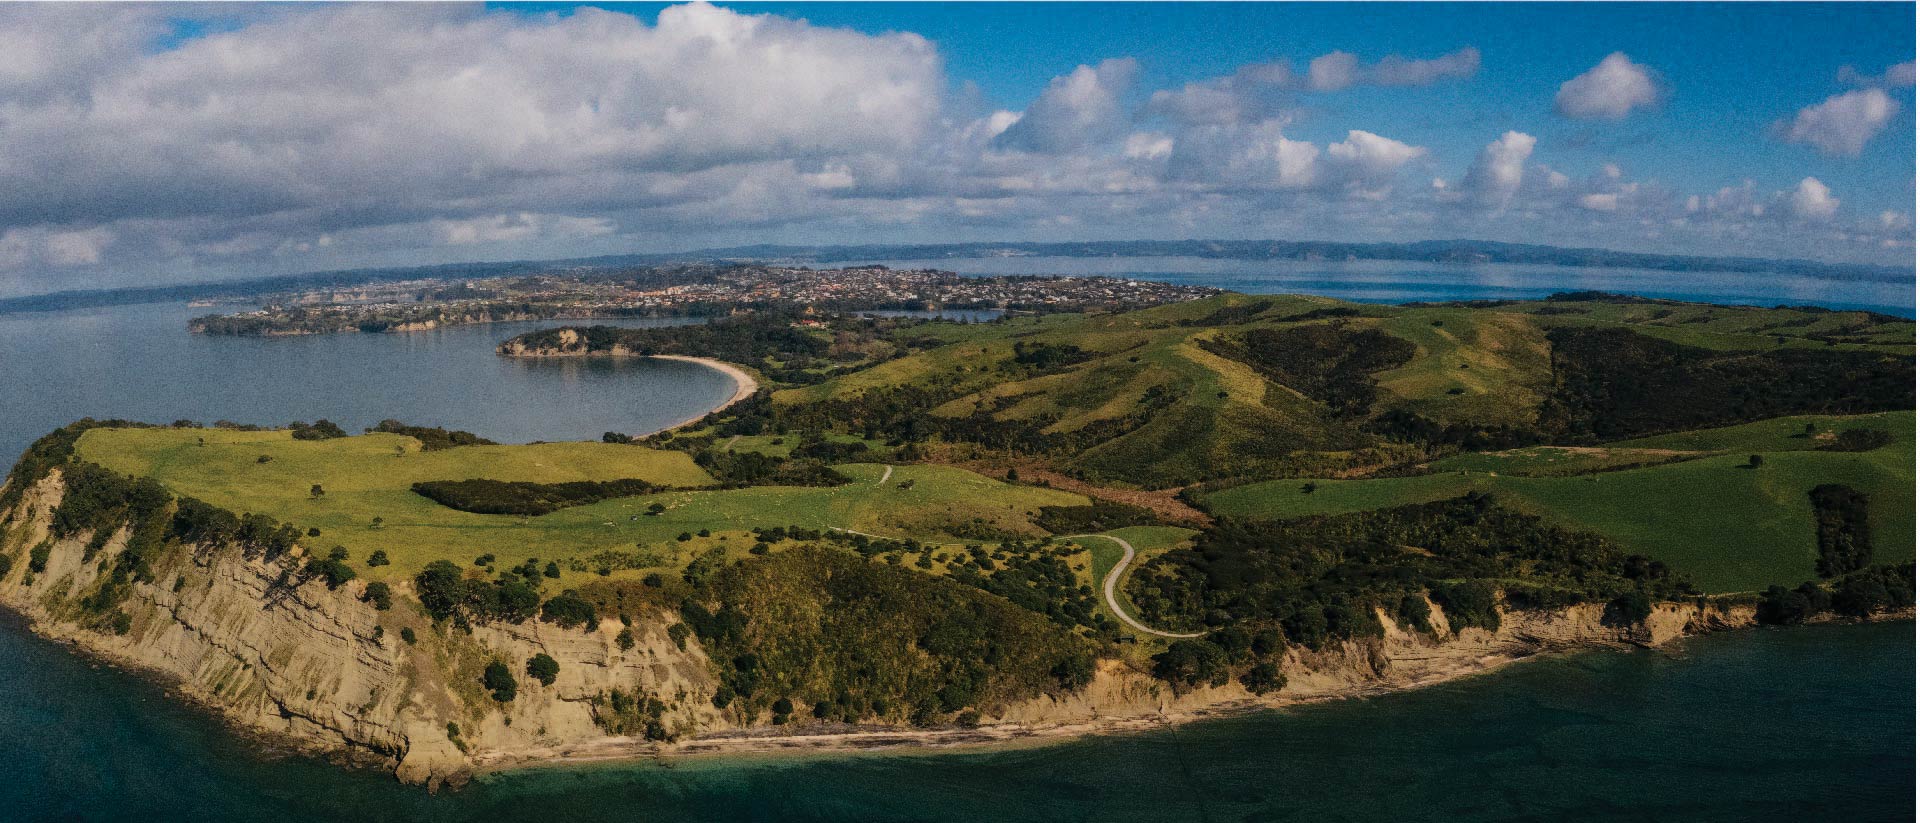 Aerial view of Shakespear Regional Park, Whangaparaoa Peninsula, that shows rolling hills and Pink Beach.